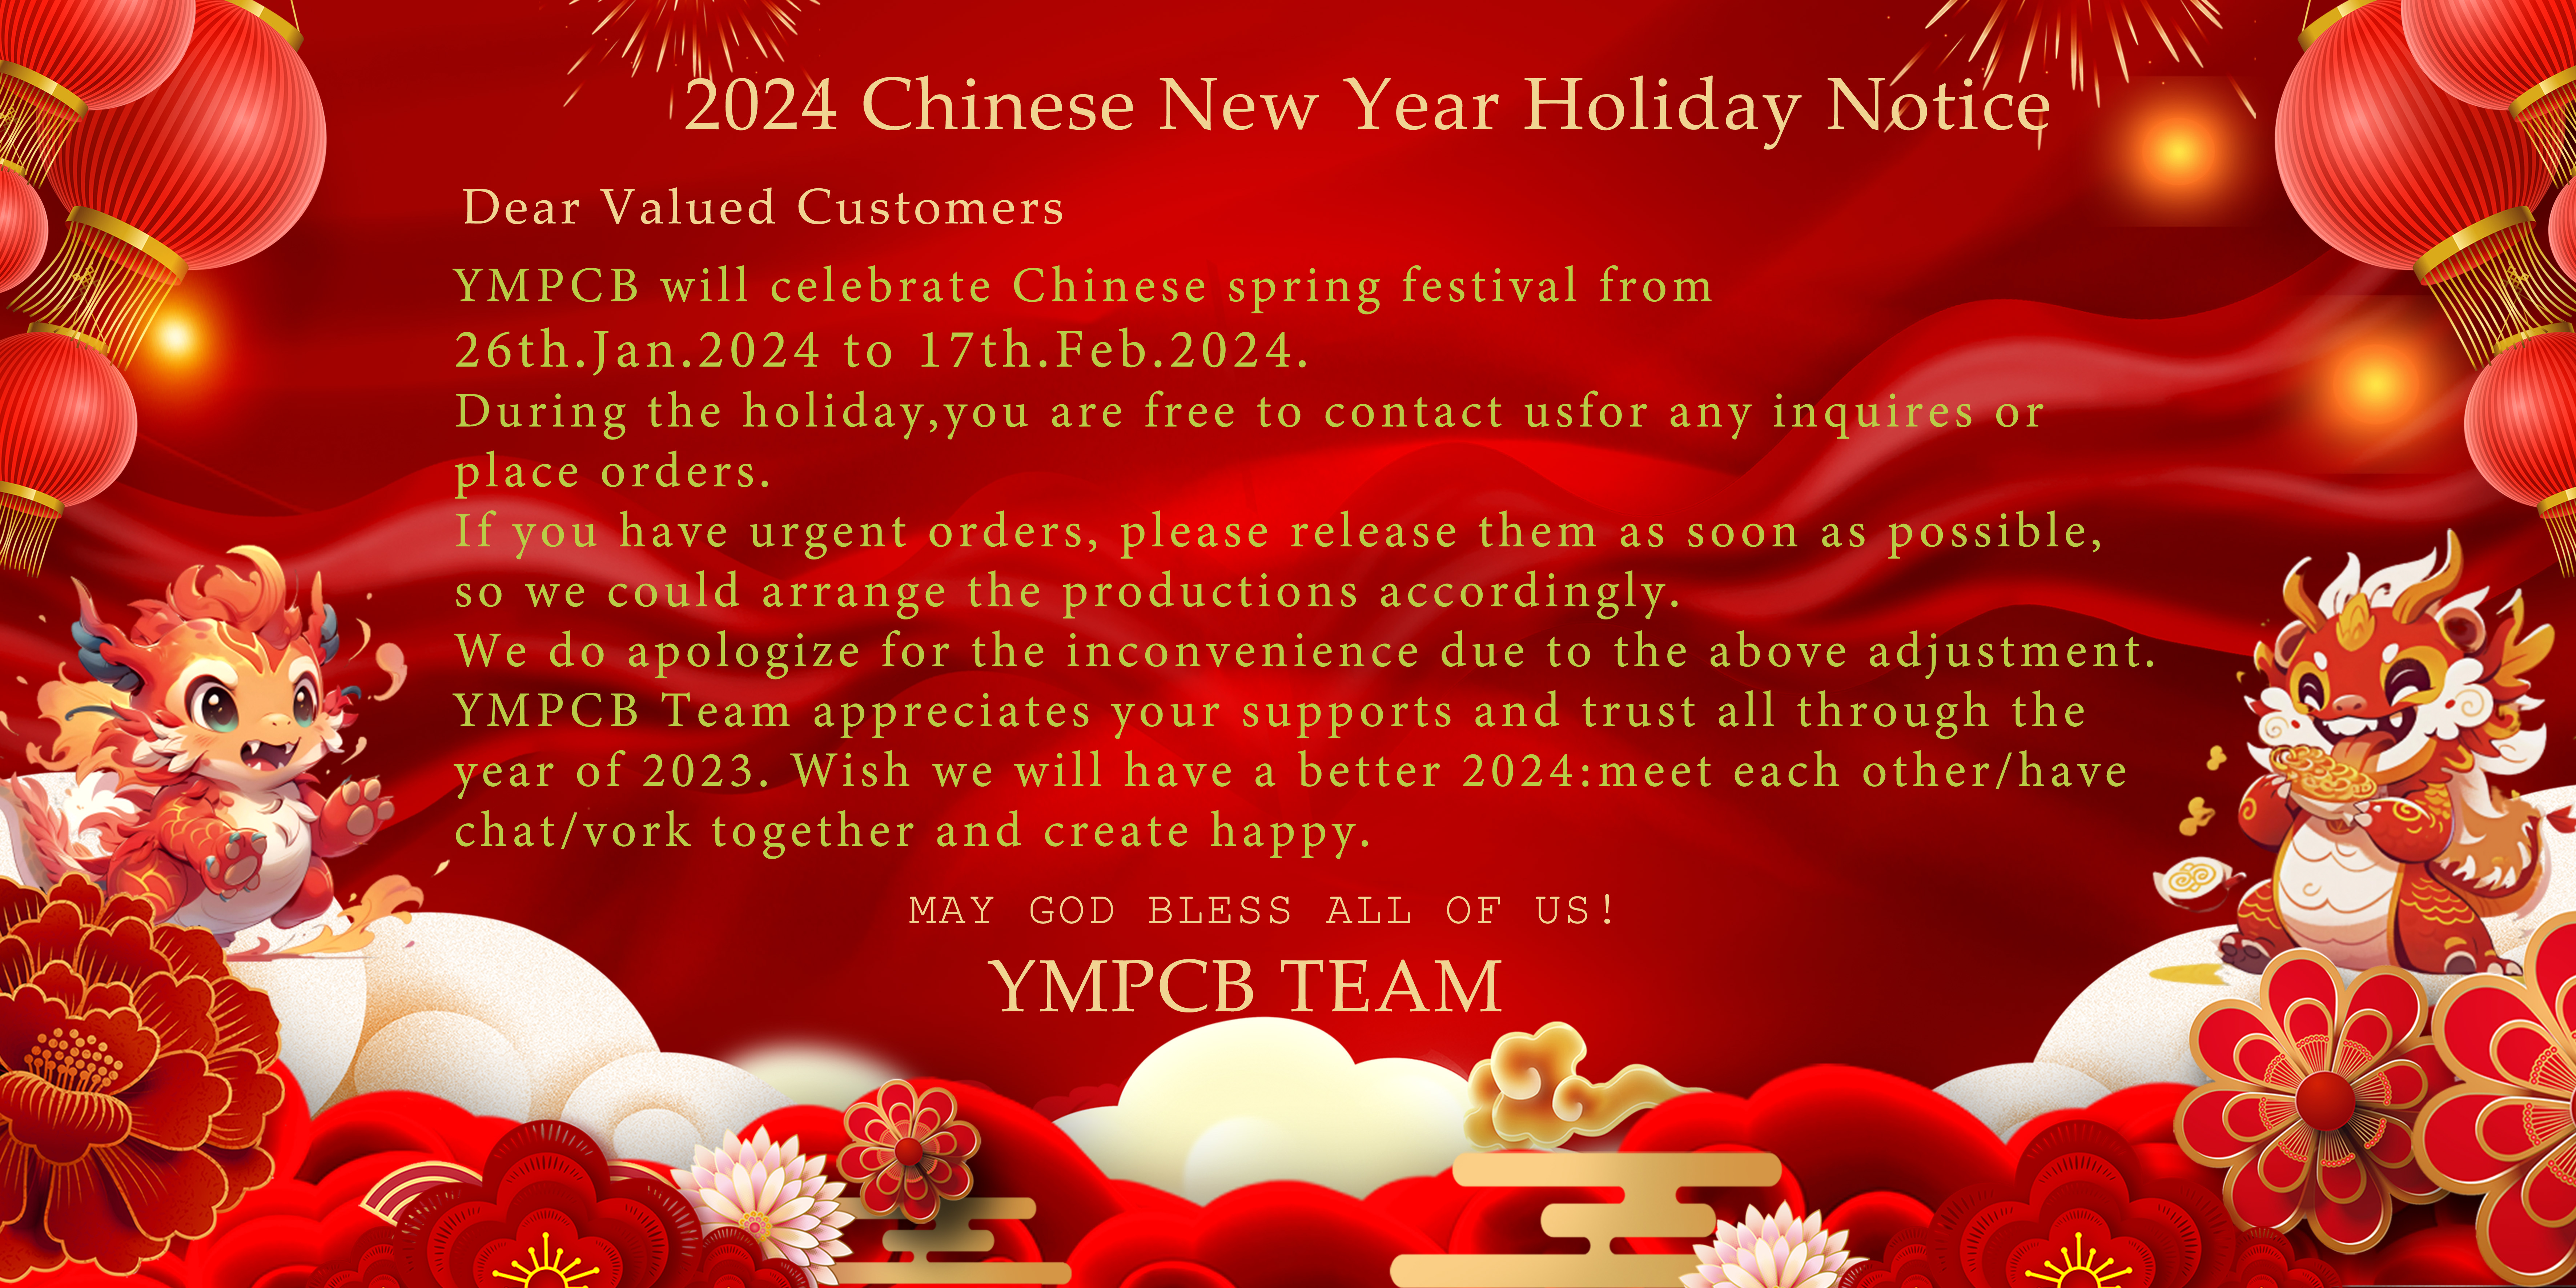 Holiday Notice-2024 Chinese New Year